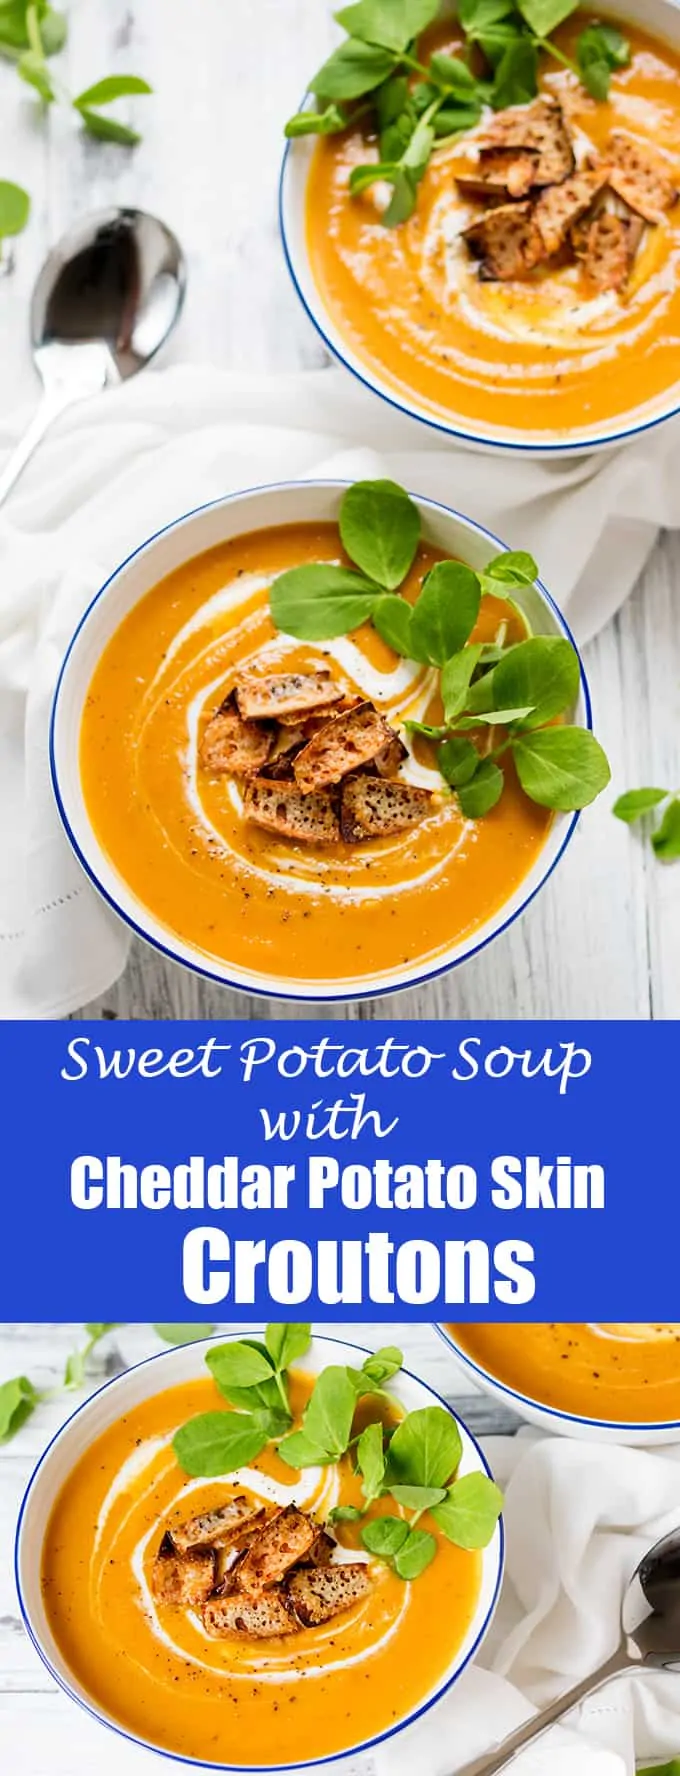 Baked sweet potato and carrot soup with cheddar potato skin croutons – A warming healthier soup. Gluten free & vegetarian.